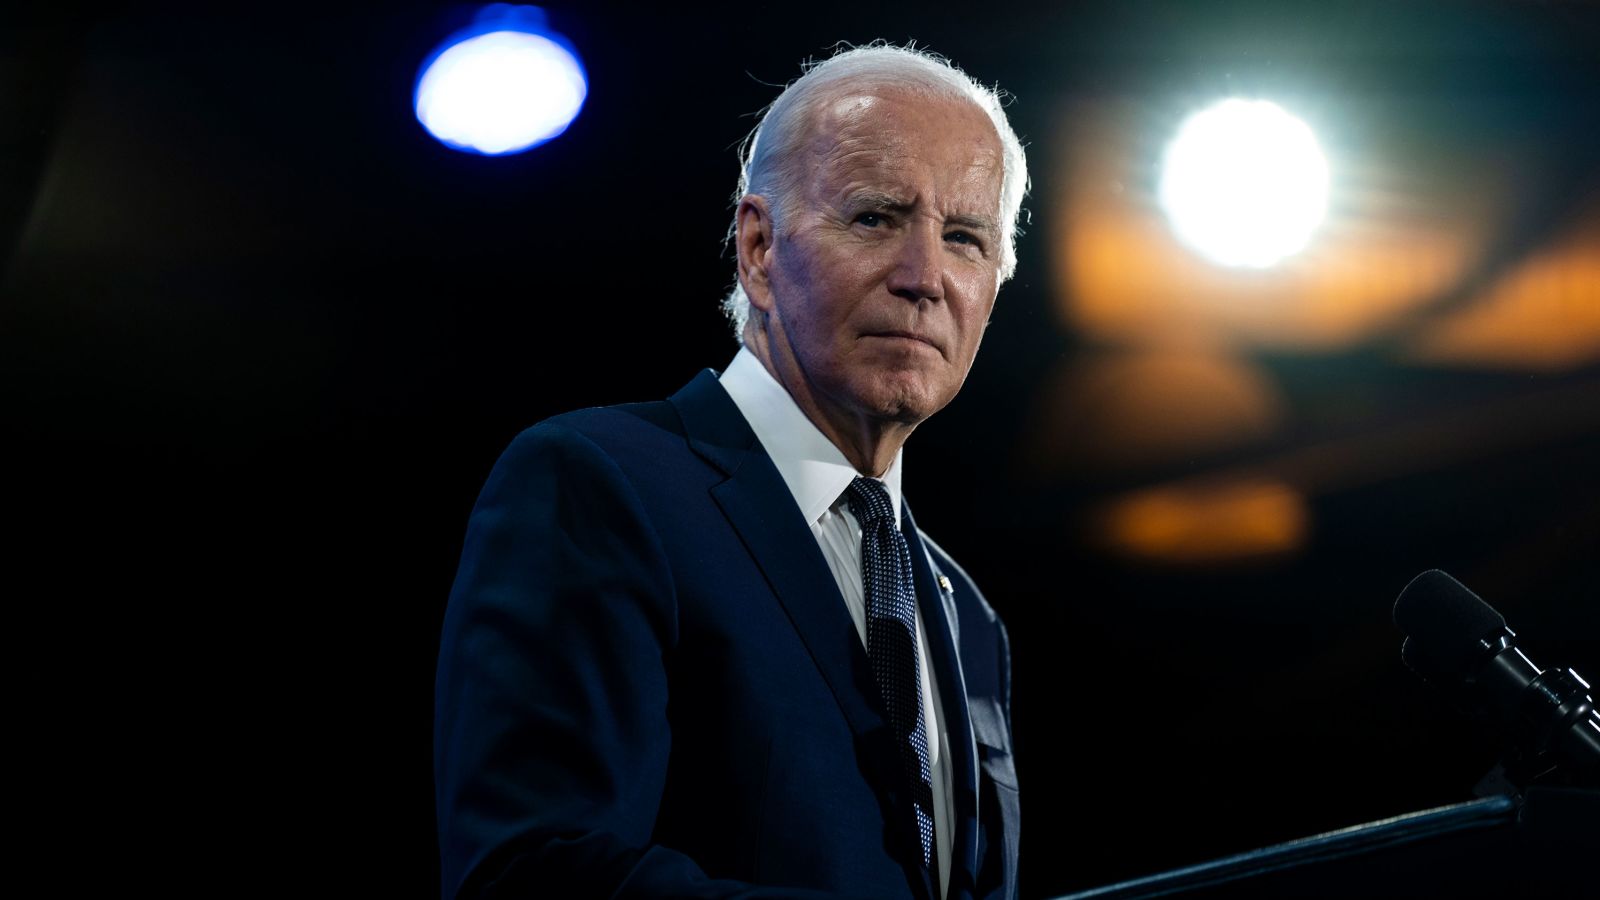 Biden’s birthday opens a debate about the age and wisdom of America’s oldest president